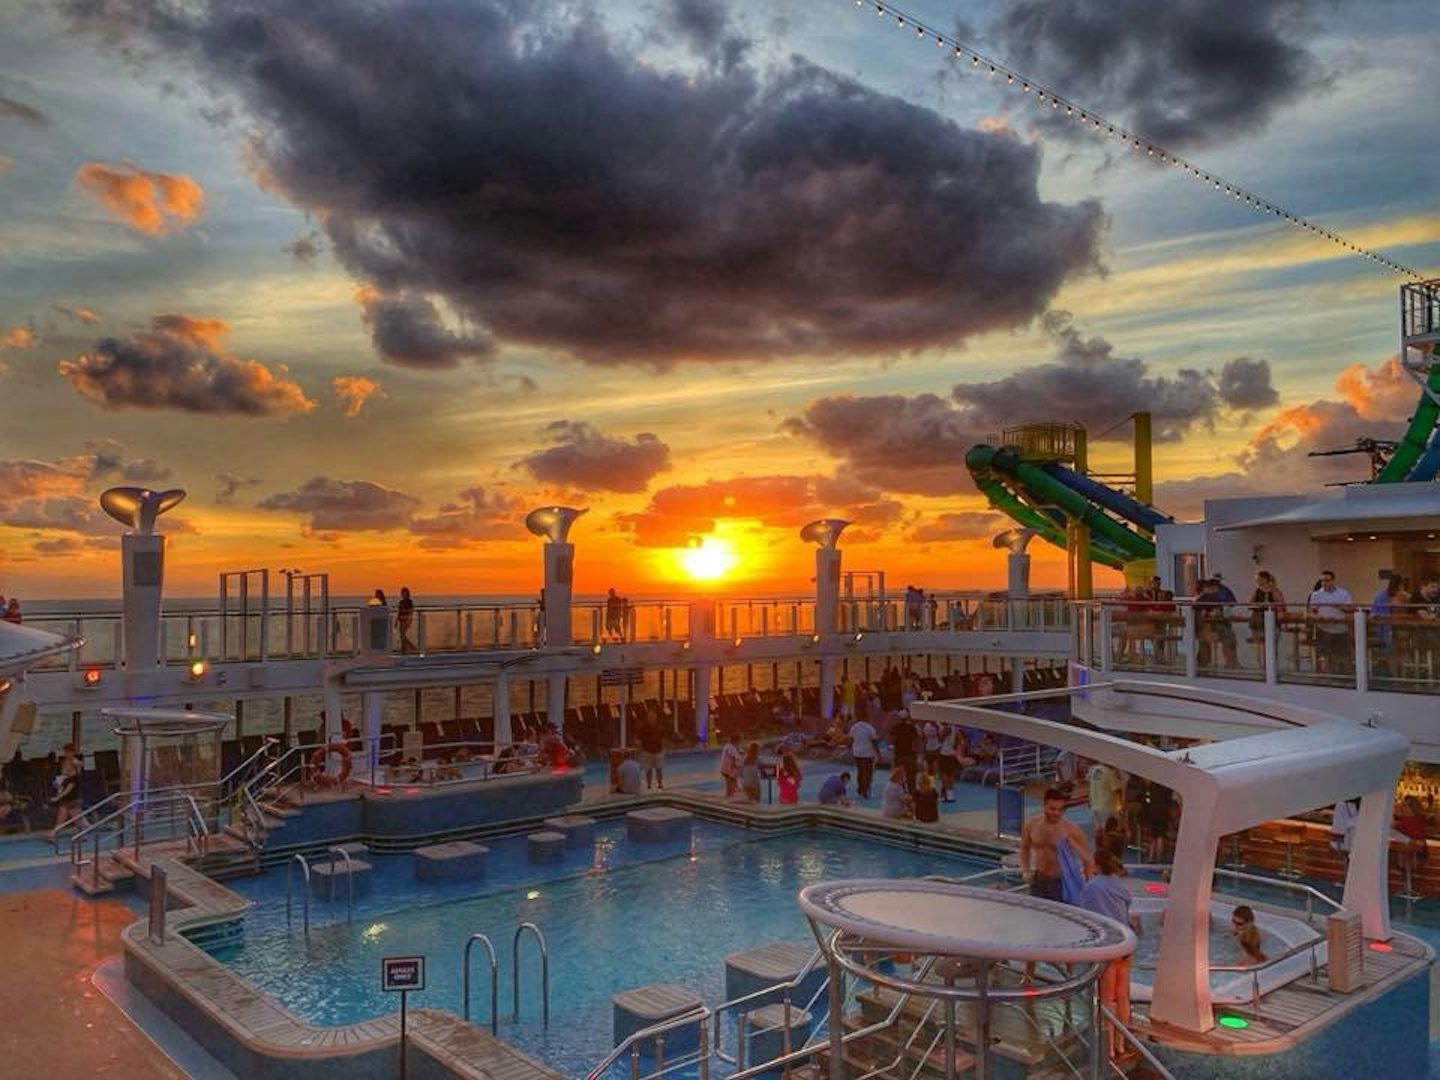 Sunset at the pool deck